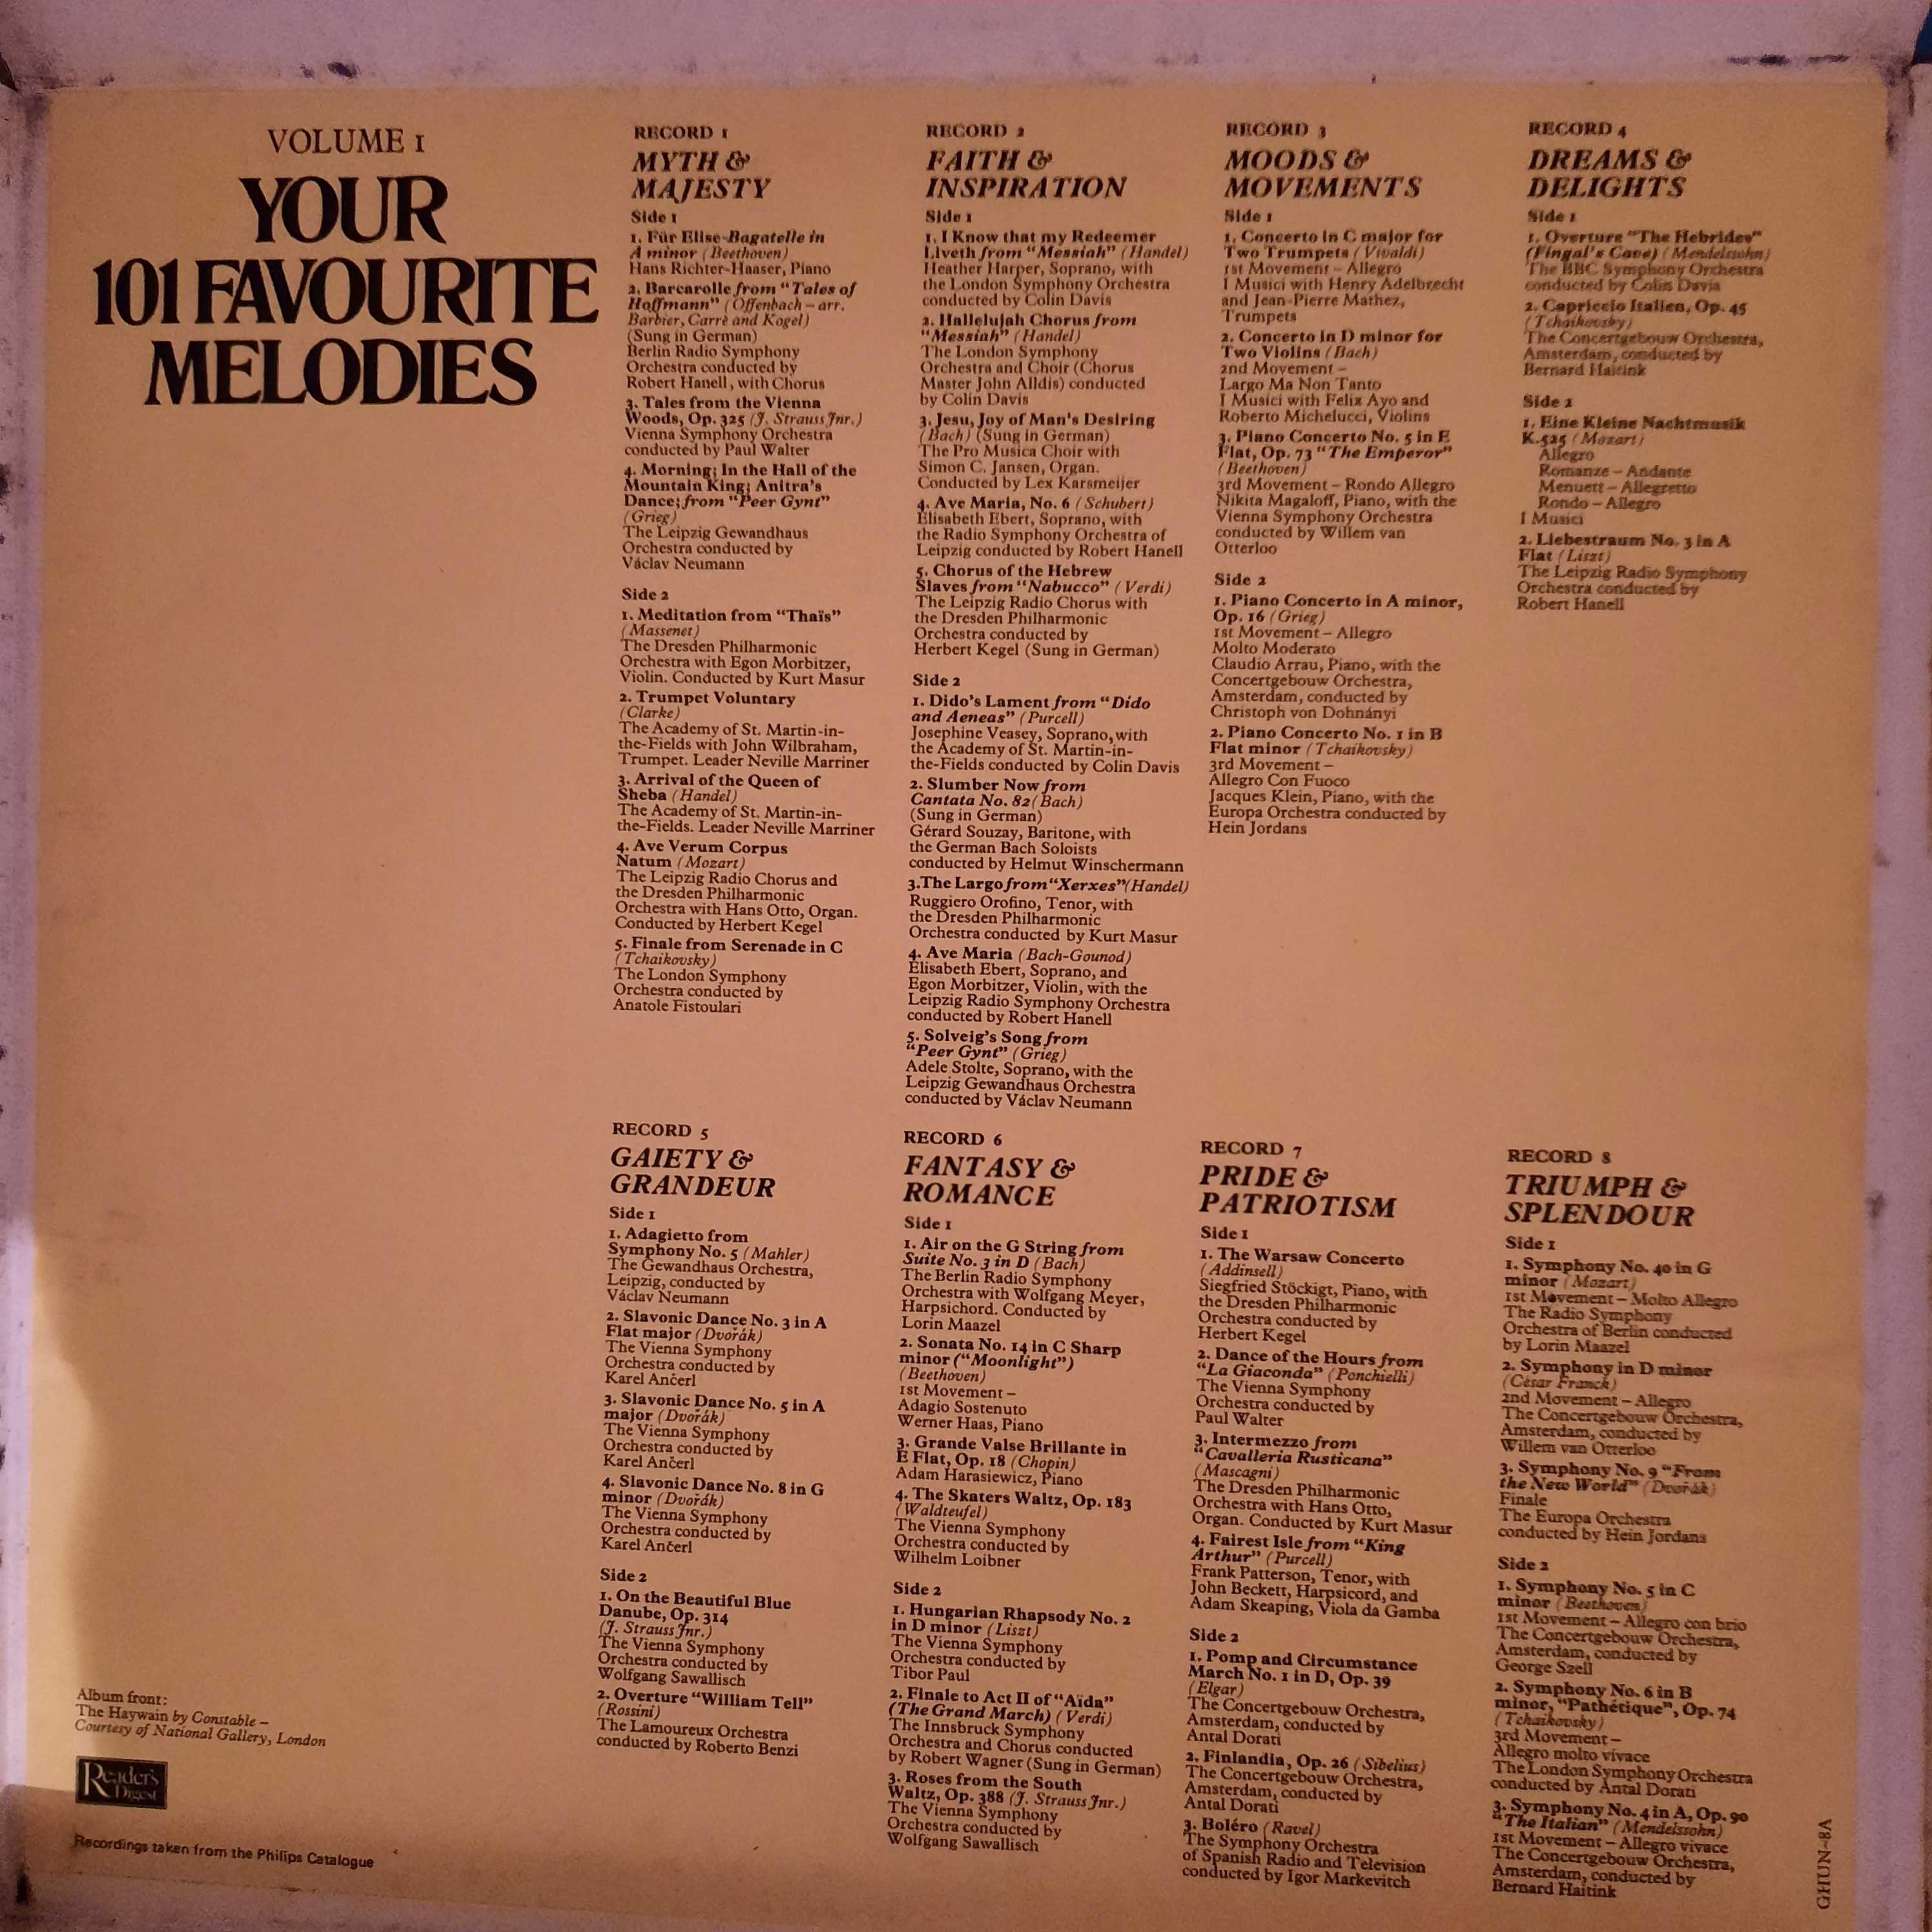 Your 101 favourite melodies - volume I